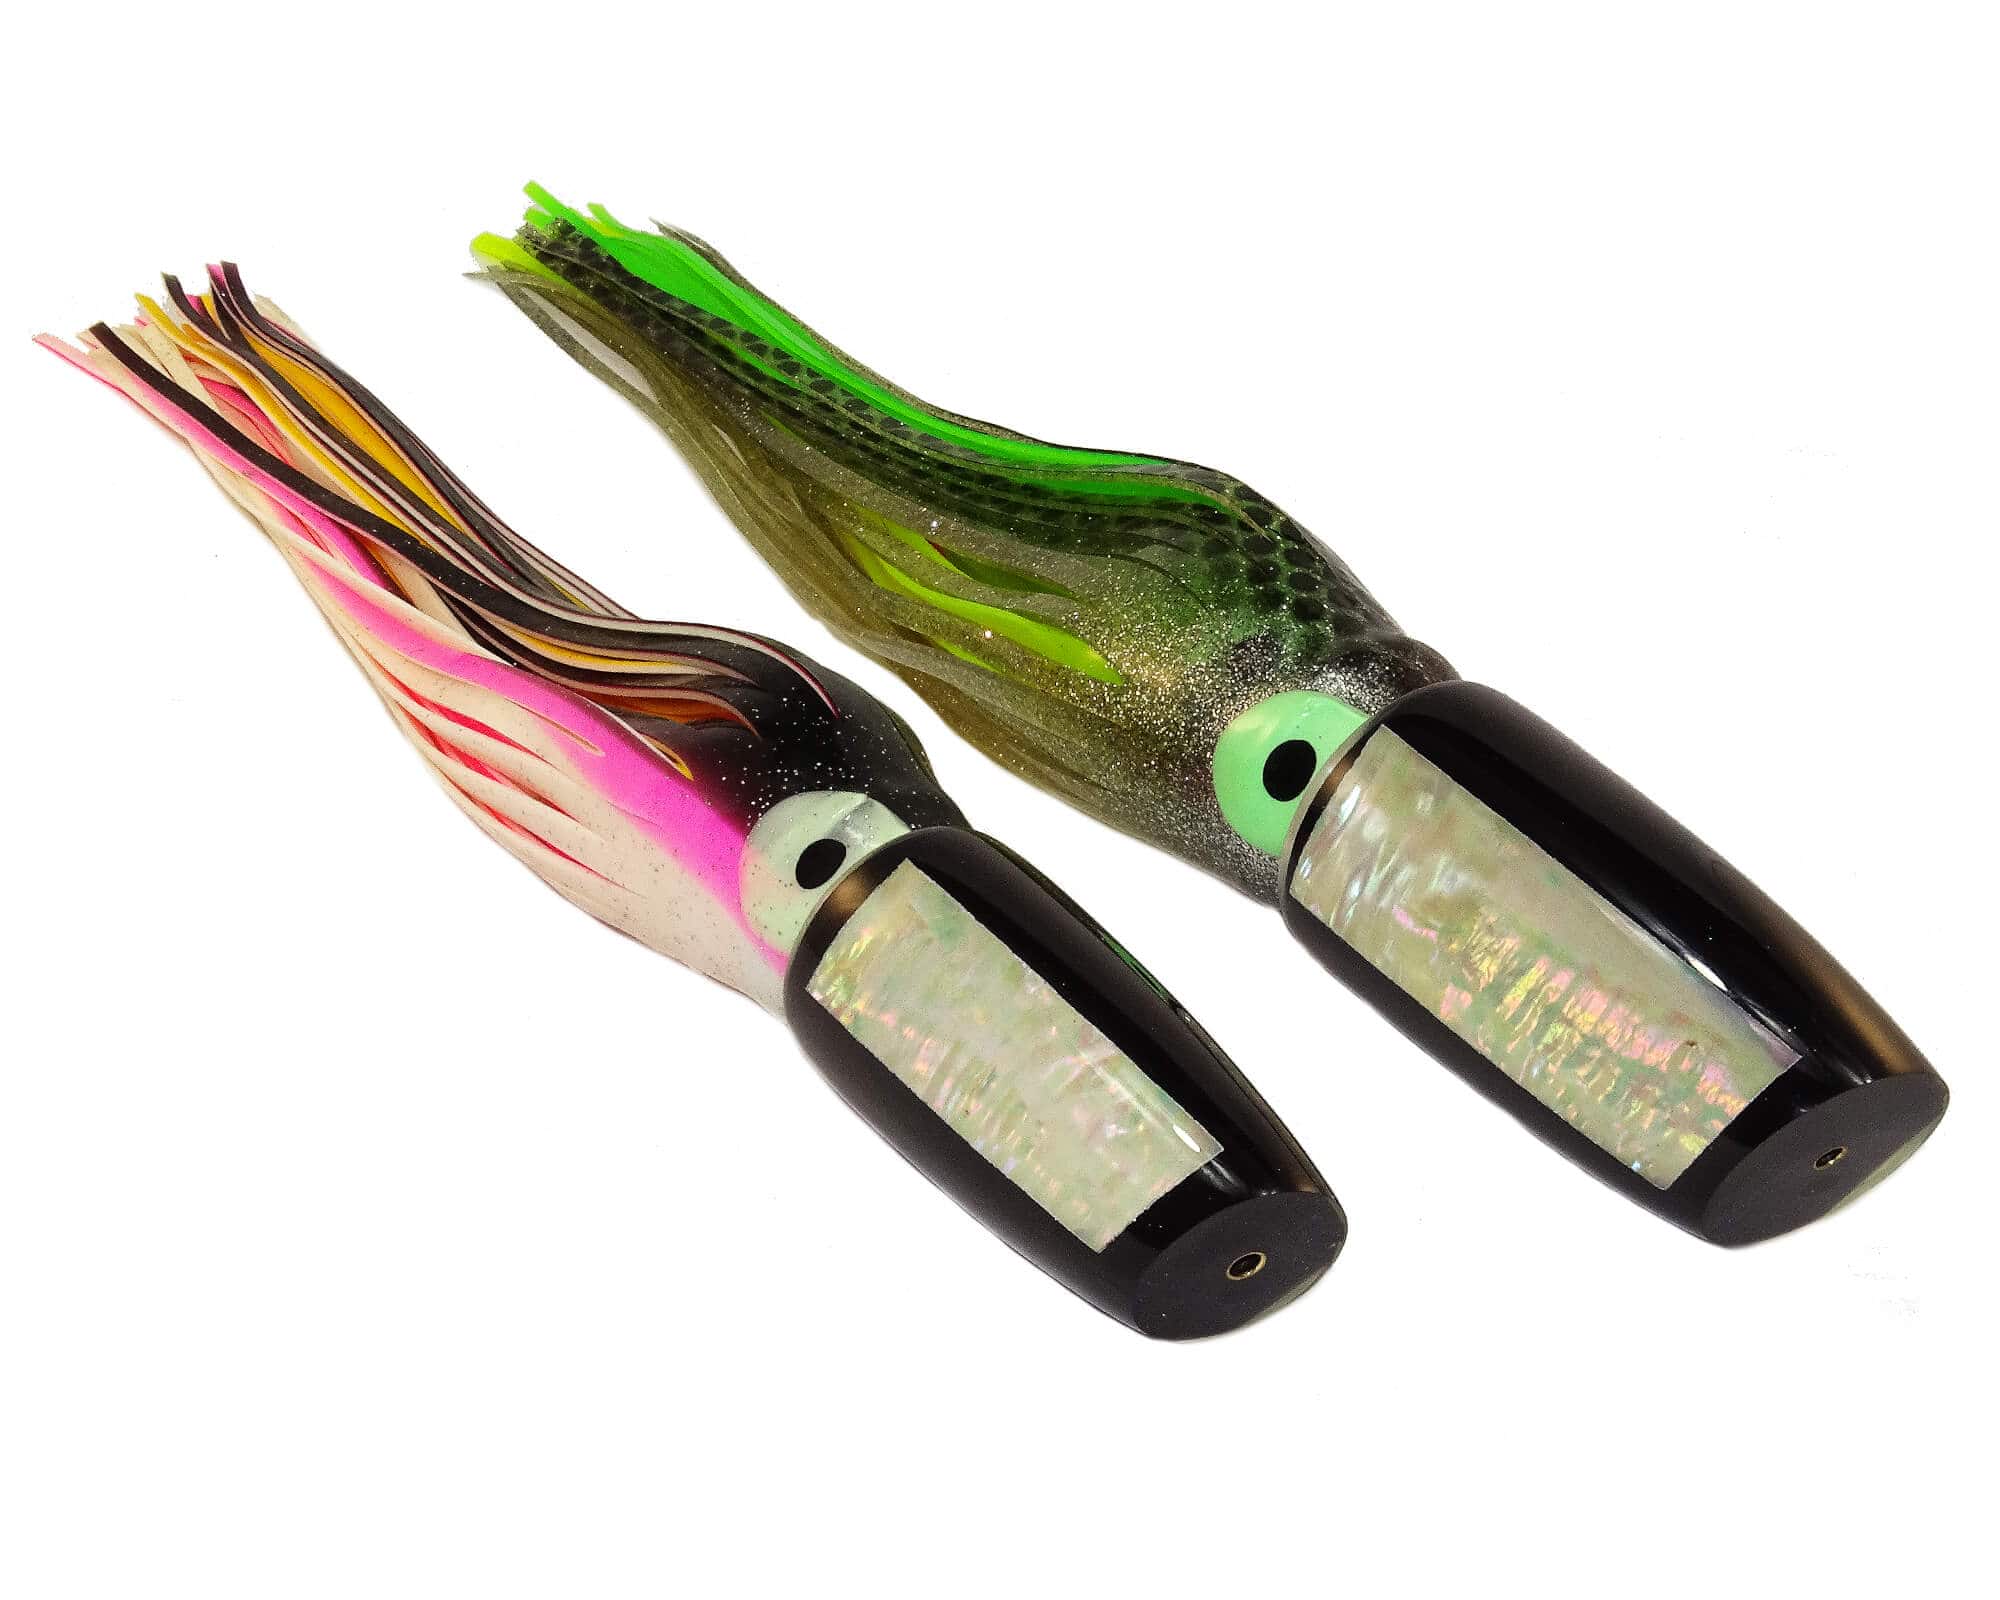 Hawaiian Super Plunger - The Best Lures for Marlin and Tuna